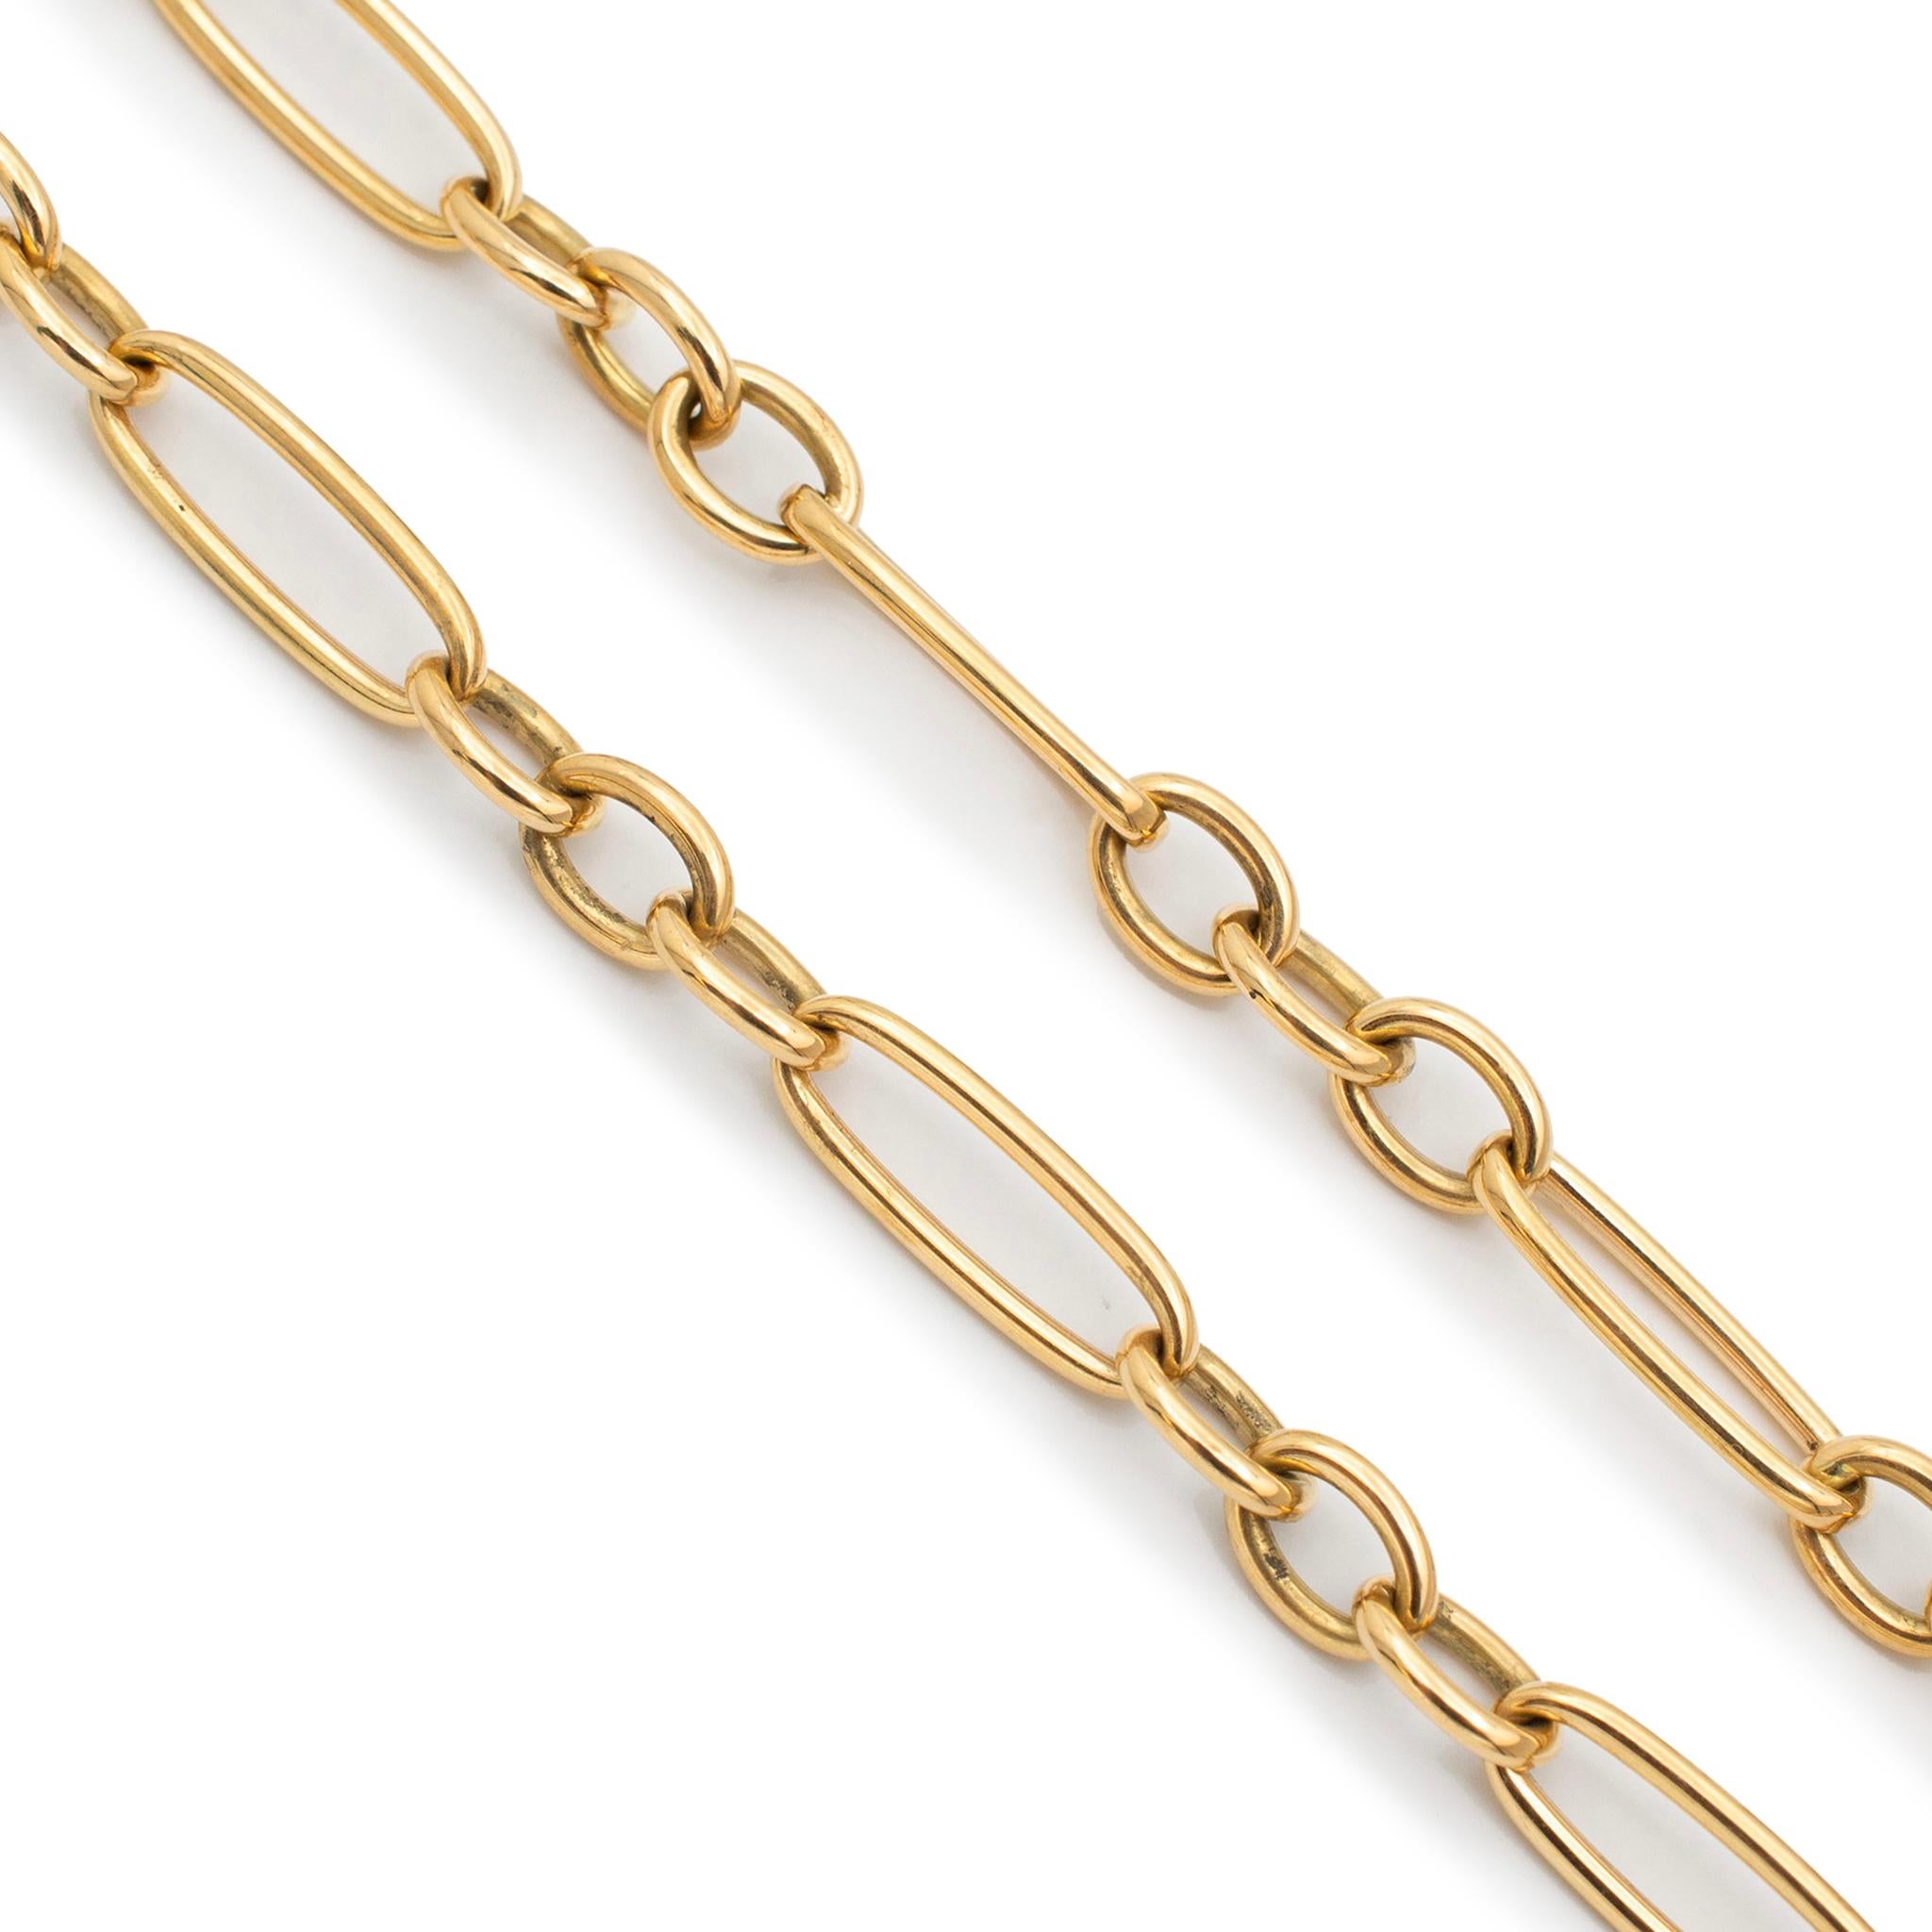 Brand: Roberto Coin

Gender: Ladies

Metal Type: 18K Yellow Gold

Length: 18.00 Inches

Weight: 16.27 grams

Roberto Coin polished 18K yellow gold cable link chain. Engraved with 